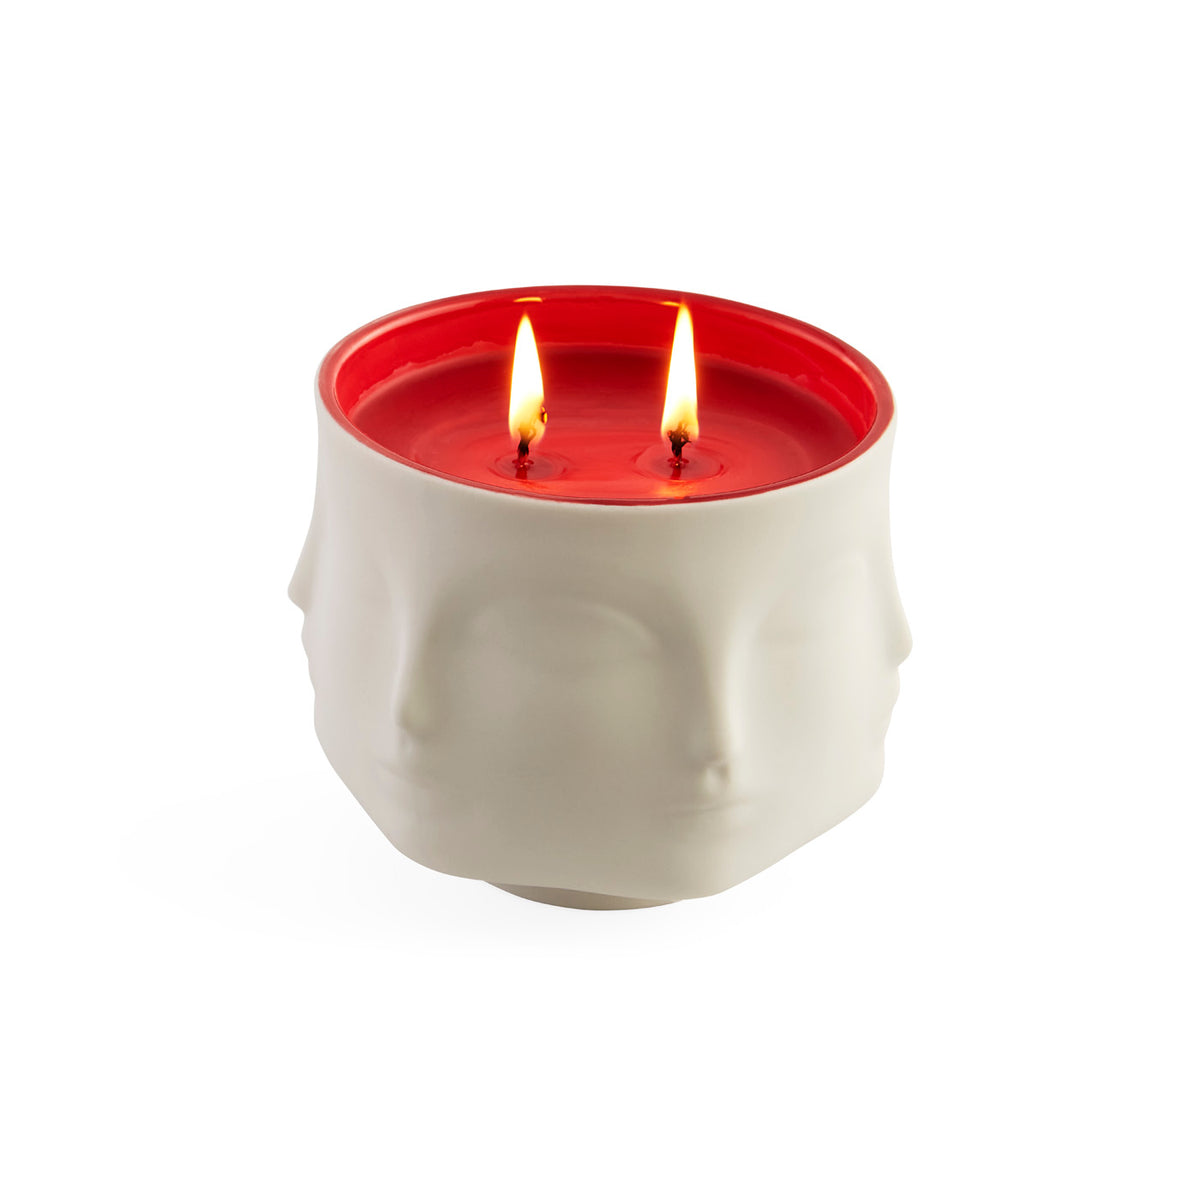 Muse Couleur Tomate Tomato Candle by Jonathan Adler